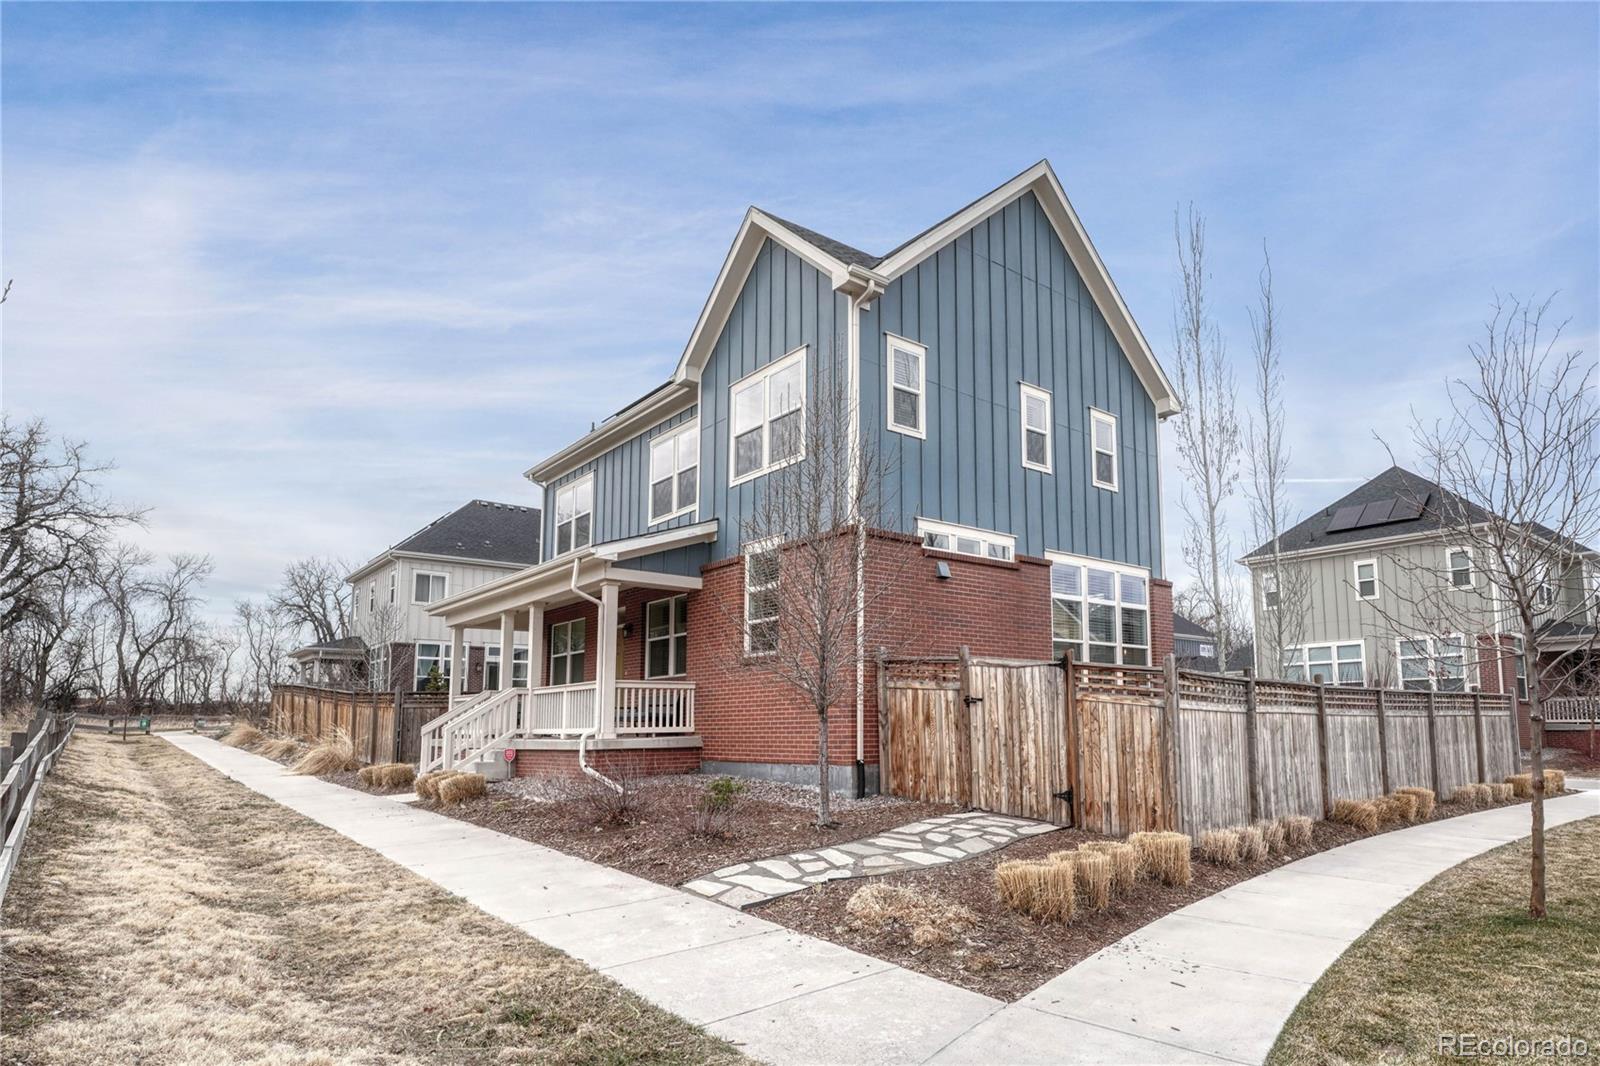 Report Image for 5334 W 95th Place,Westminster, Colorado